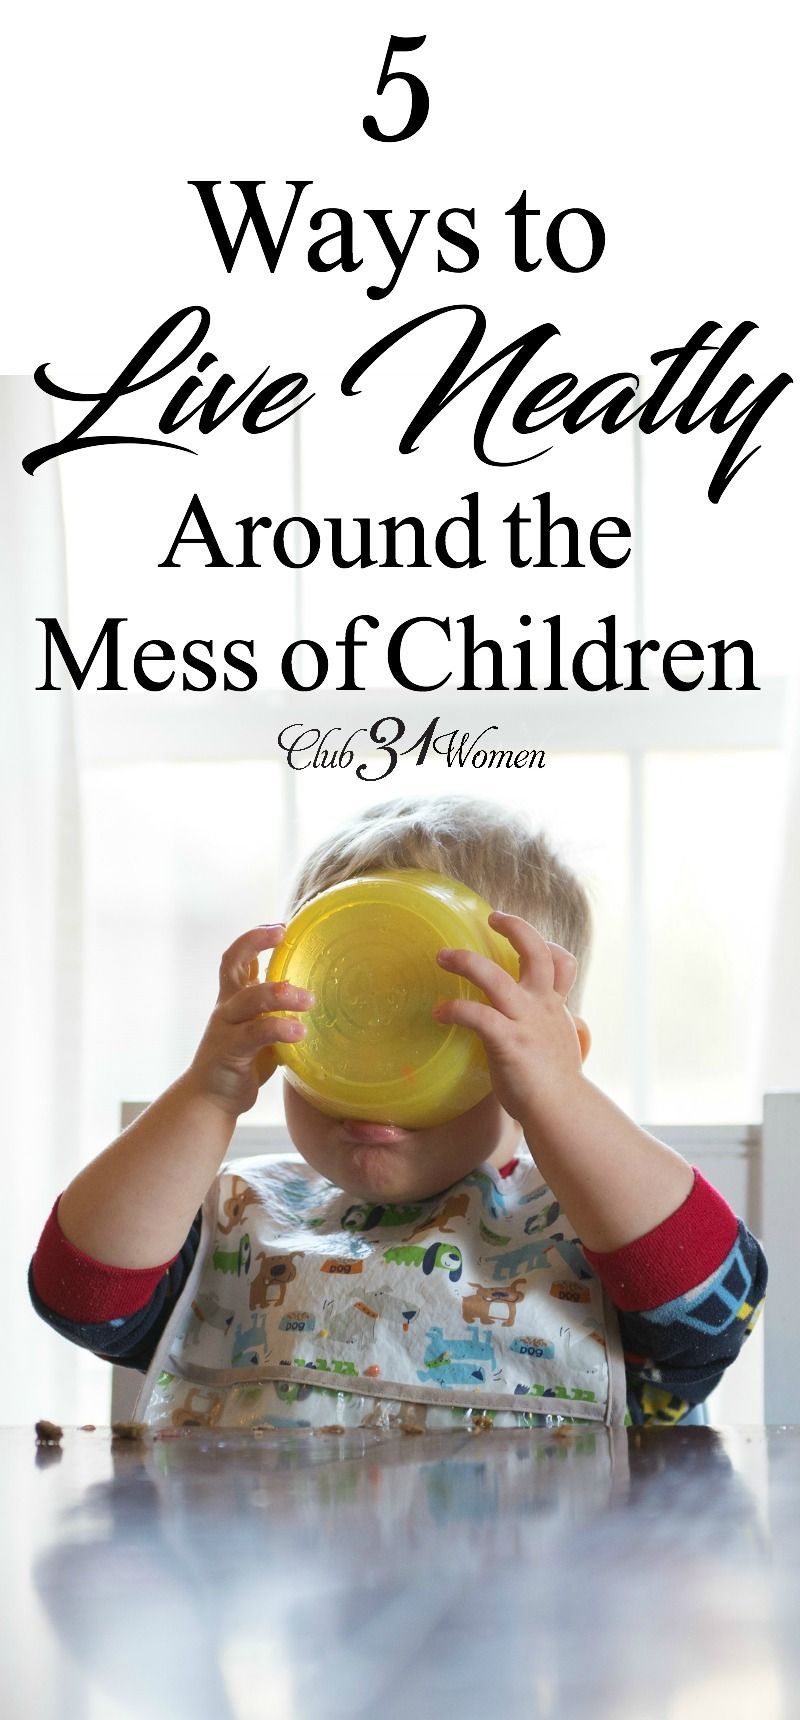 Having children can wreak havoc on a clean home, no doubt. So how can we keep up with the mess so we aren’t constantly living in